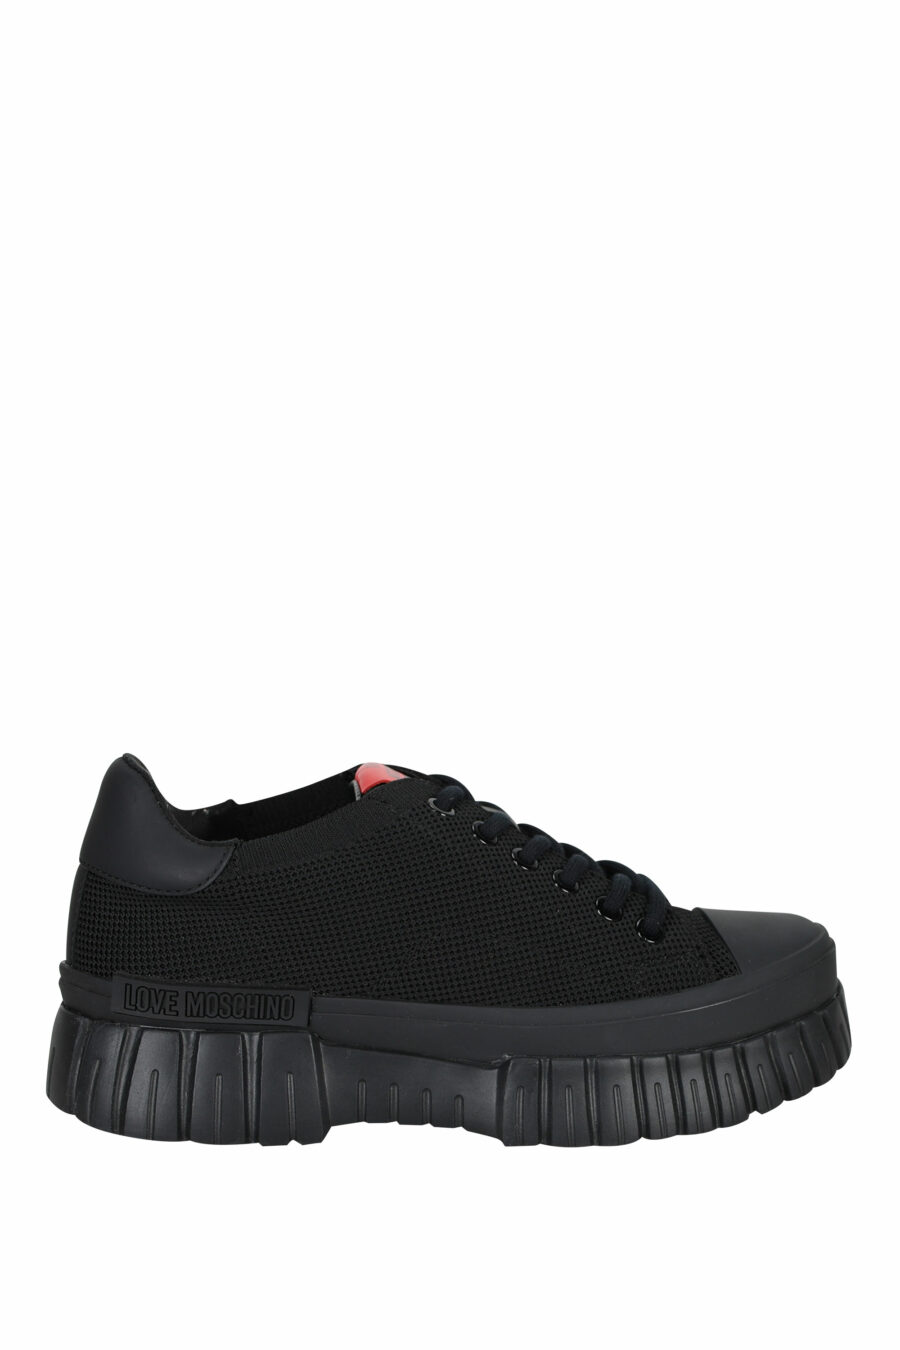 Black mix trainers with logo - 8054653167971